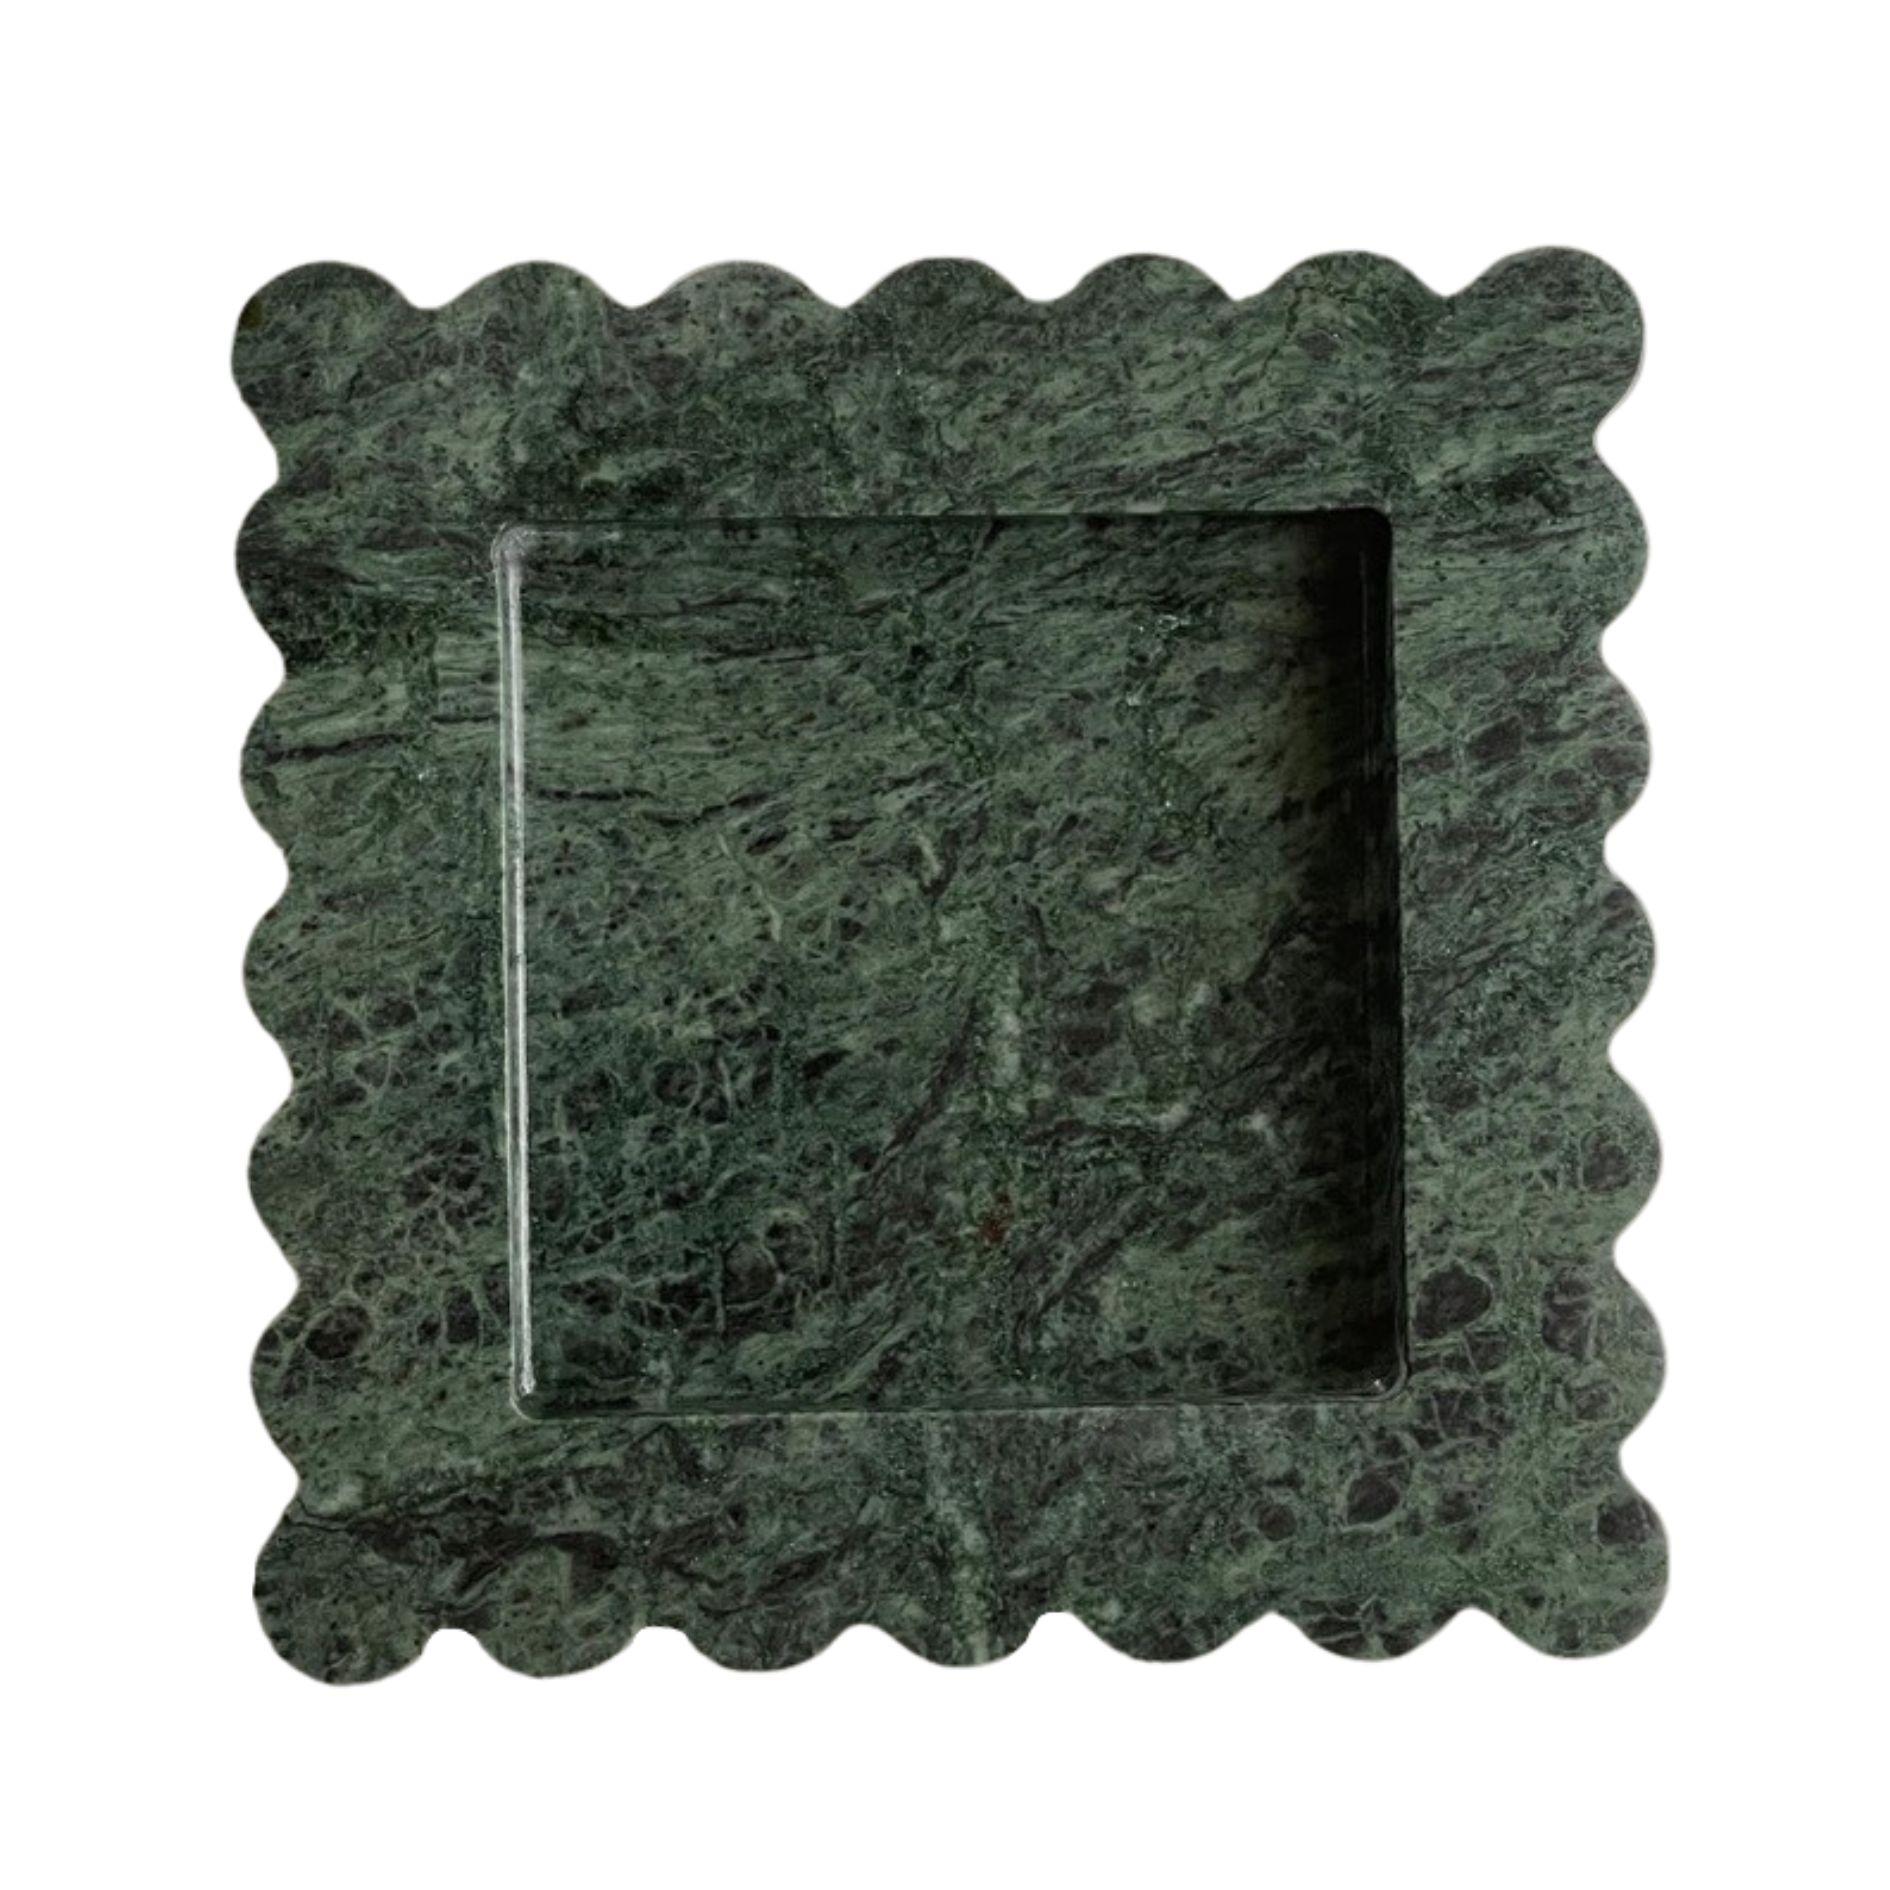 Box Tray: Chunky Scalloped Edge Square Tray in Emerald Marble by Anastasio Home